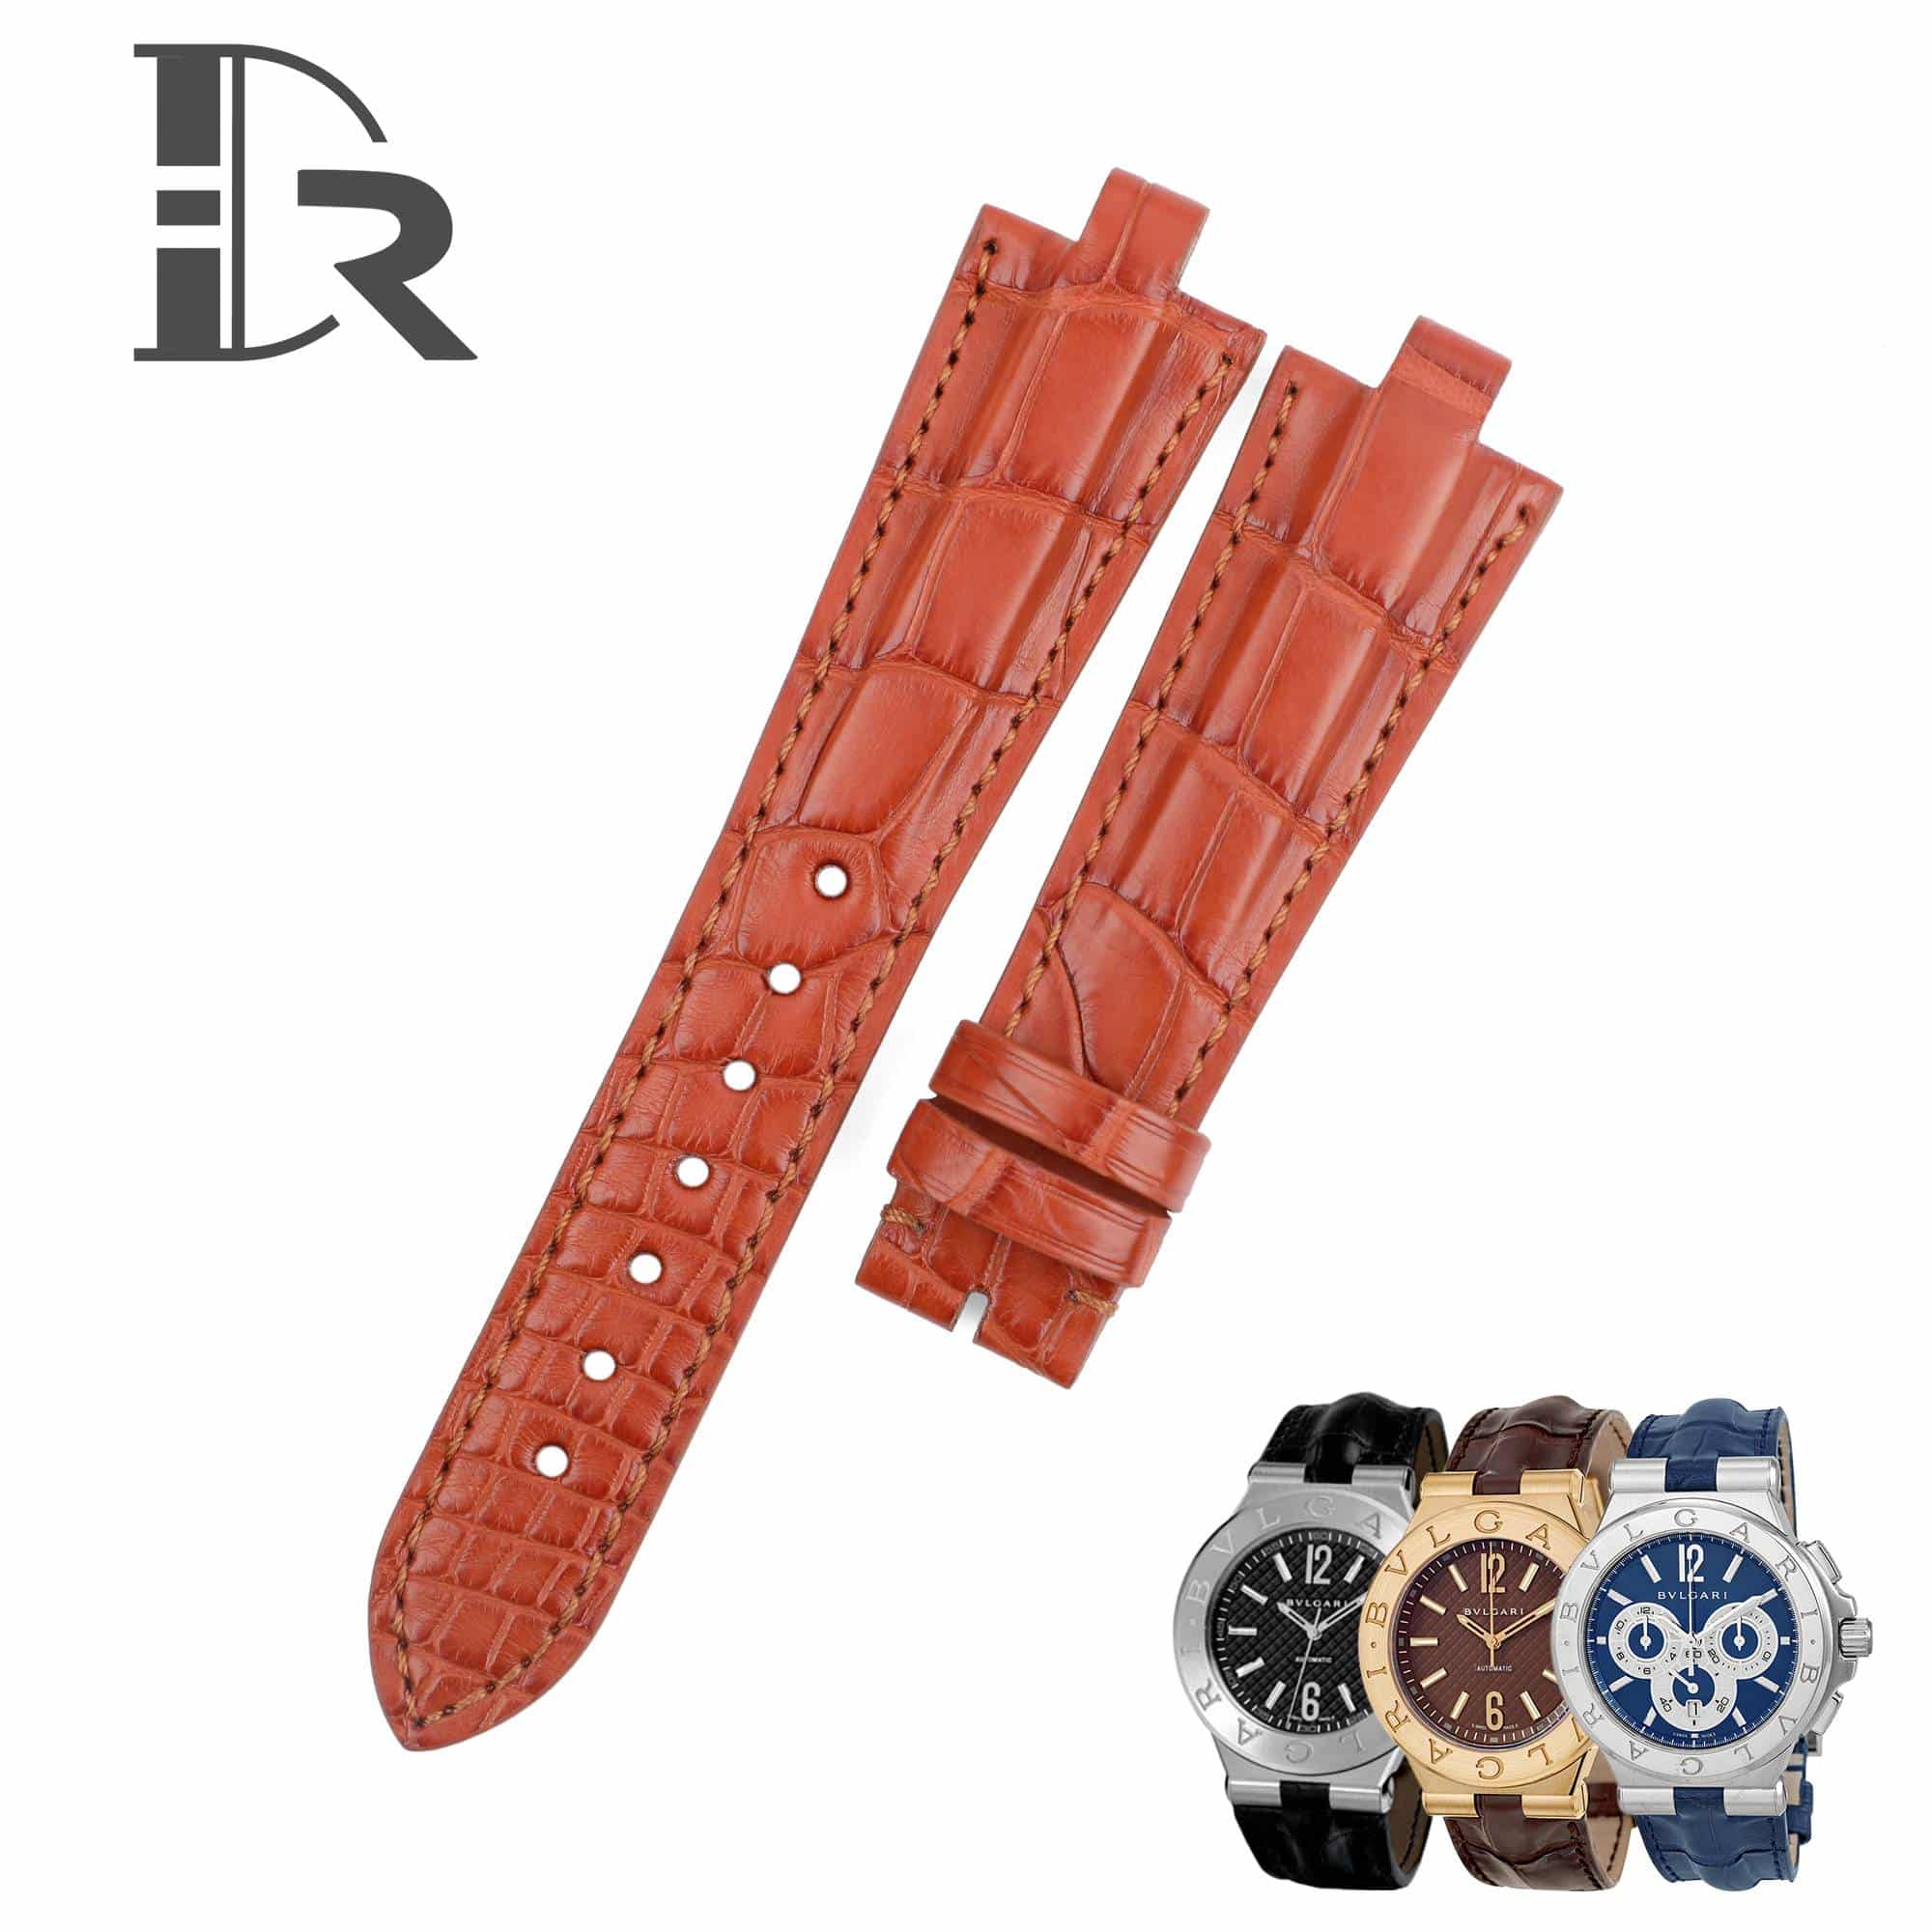 Genuine best quality Belly-scale brown alligator crocodile custom Bvlgari leather watch strap & watch band replacement for Bvlgari Diagono Aluminium AL38A L3276 mens and women's luxury watch - OEM aftermarket high-end straps and watchbands online at a low price from dr watchstrap